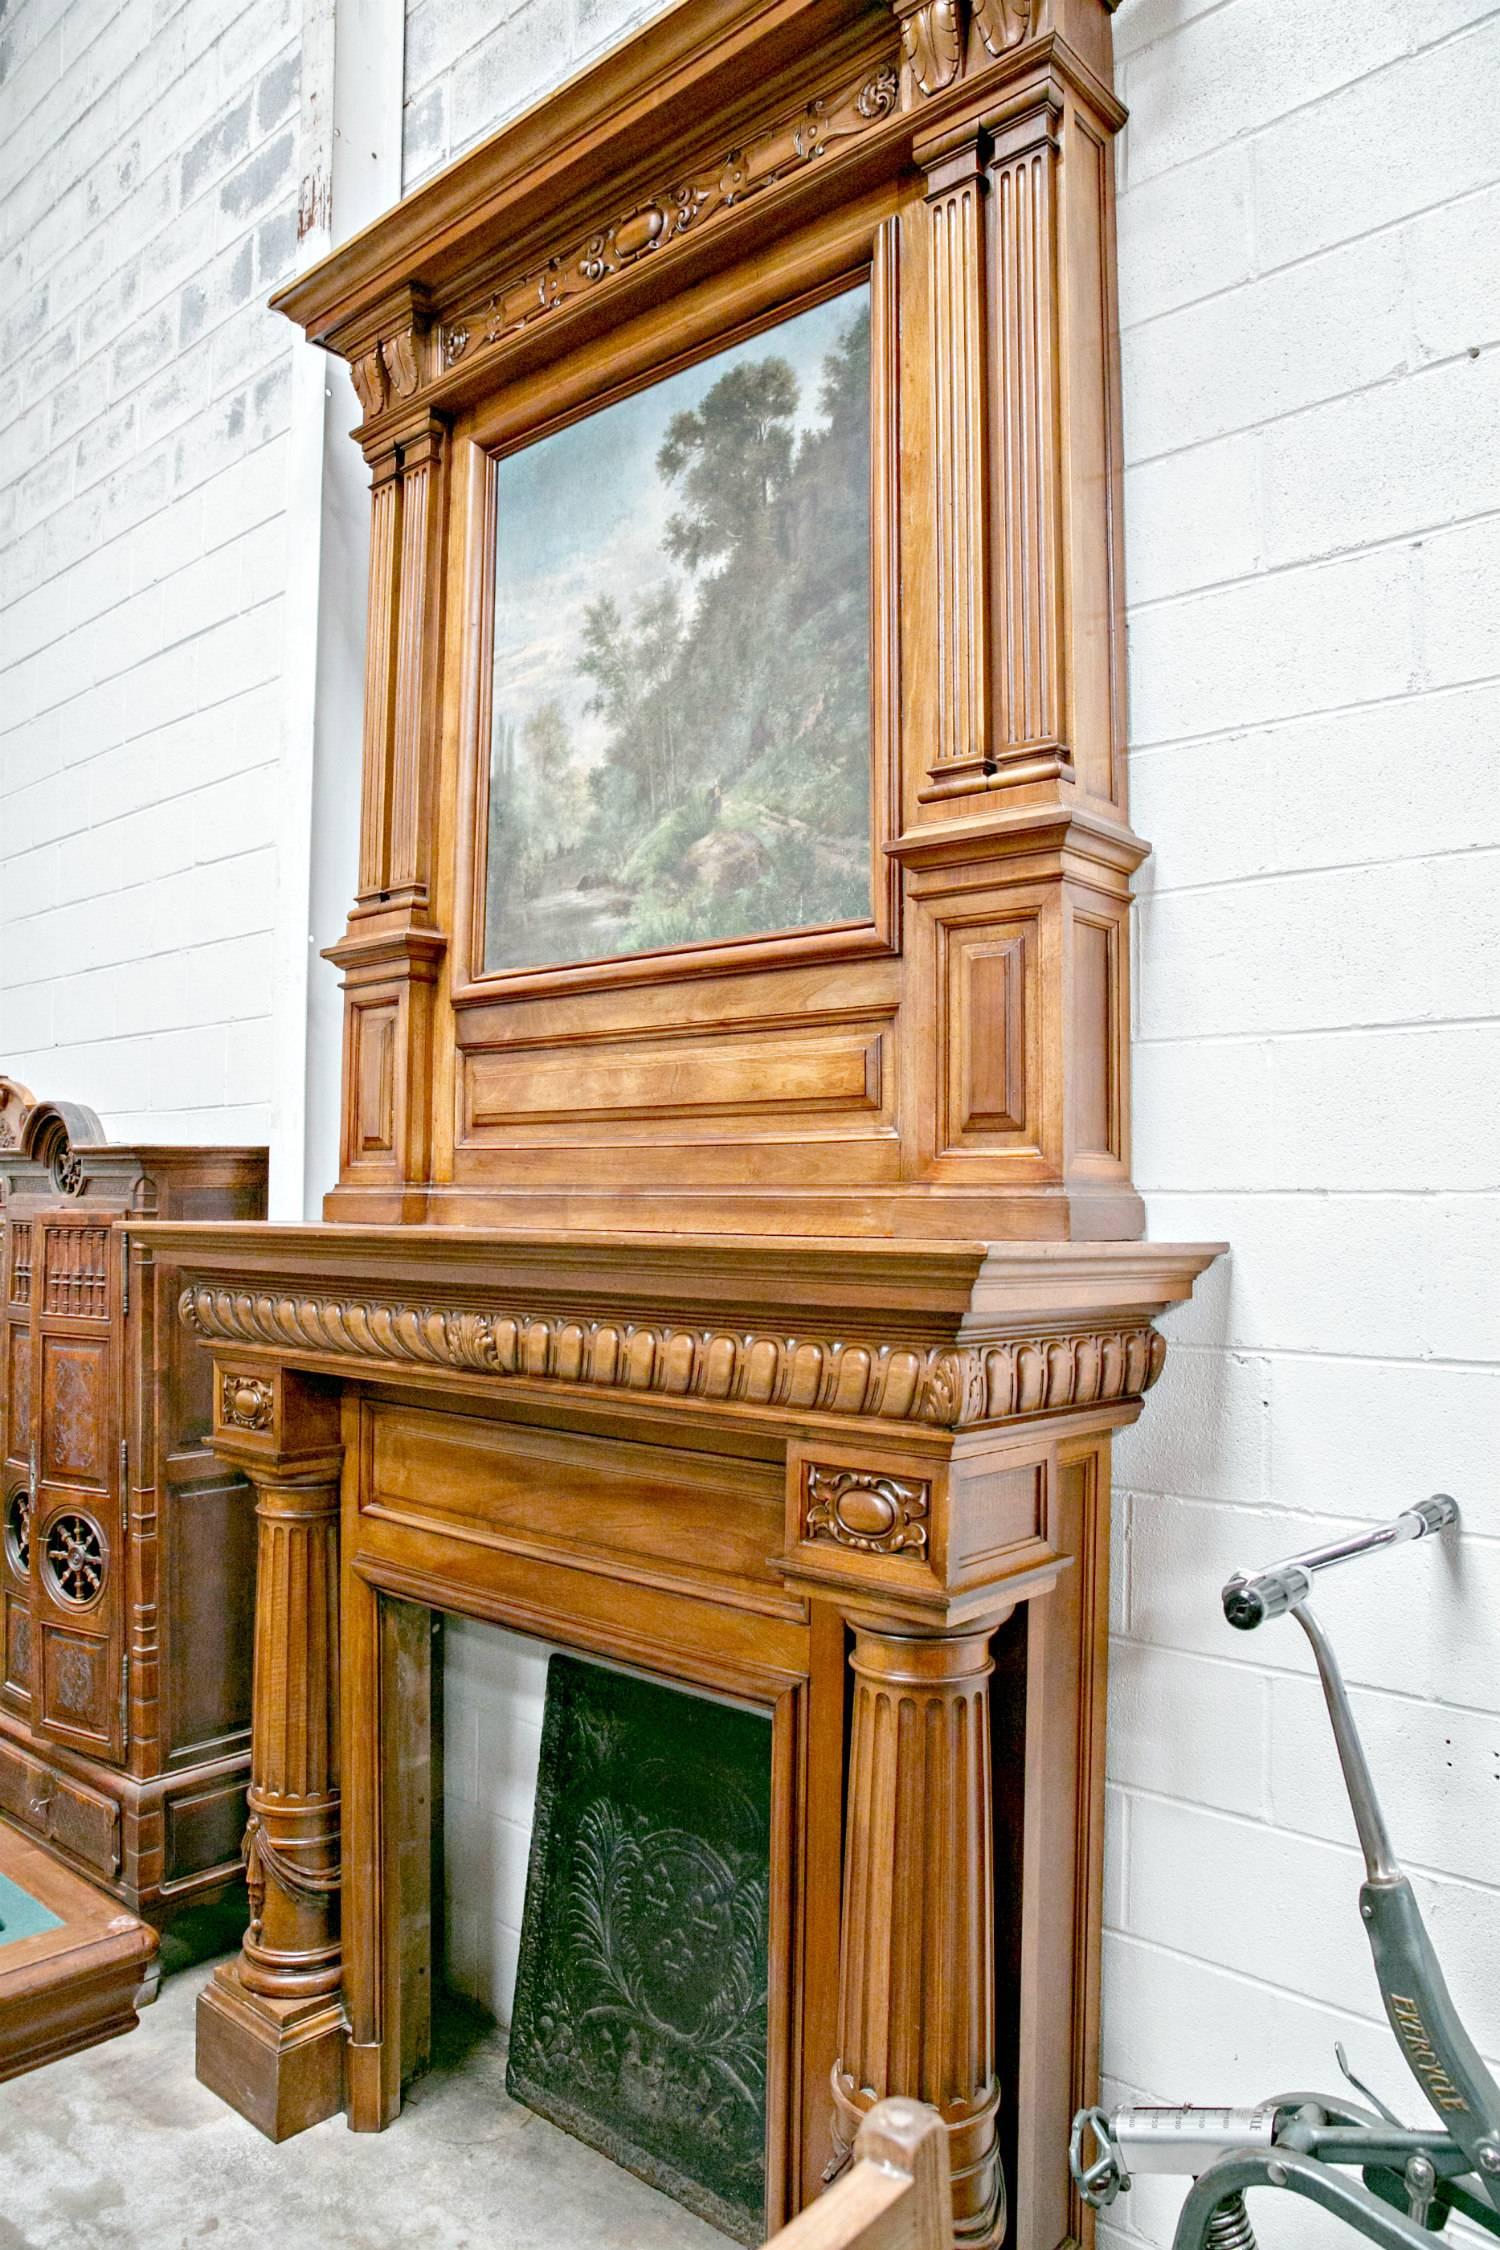 A fine monumental French chimneypiece and trumeau overmantel in the Renaissance Revival style. The masterfully hand-carved fireplace is of solid French walnut and dates from the late 19th century when it was custom built for a chateau in the